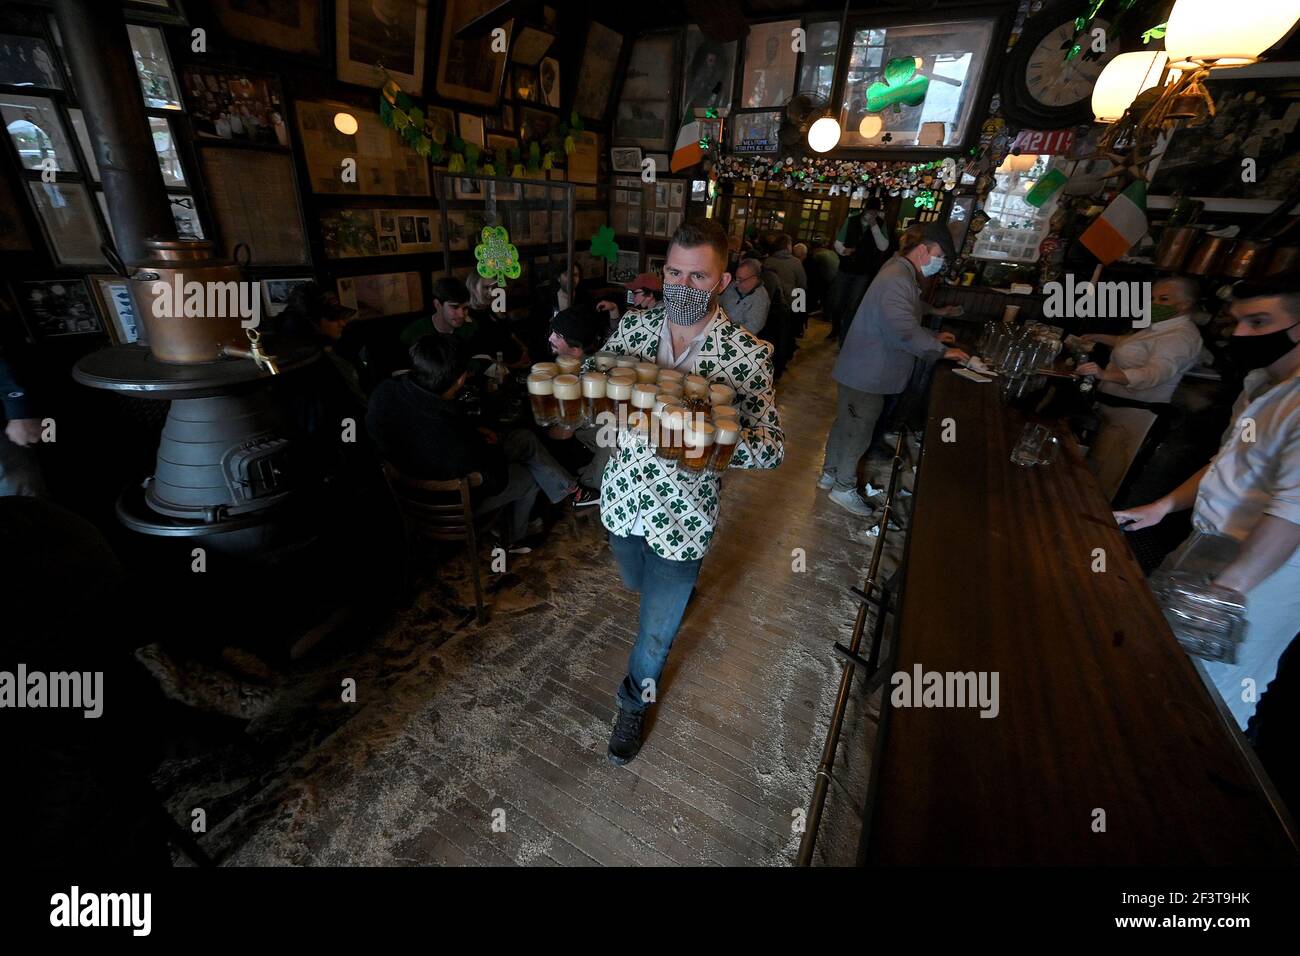 Know as the oldest Irish pub in New York City, a server carries 20 mugs of  beer to patrons celebrating St. Patrick's Day at McSorely's Old Ale House  in New York, NY,